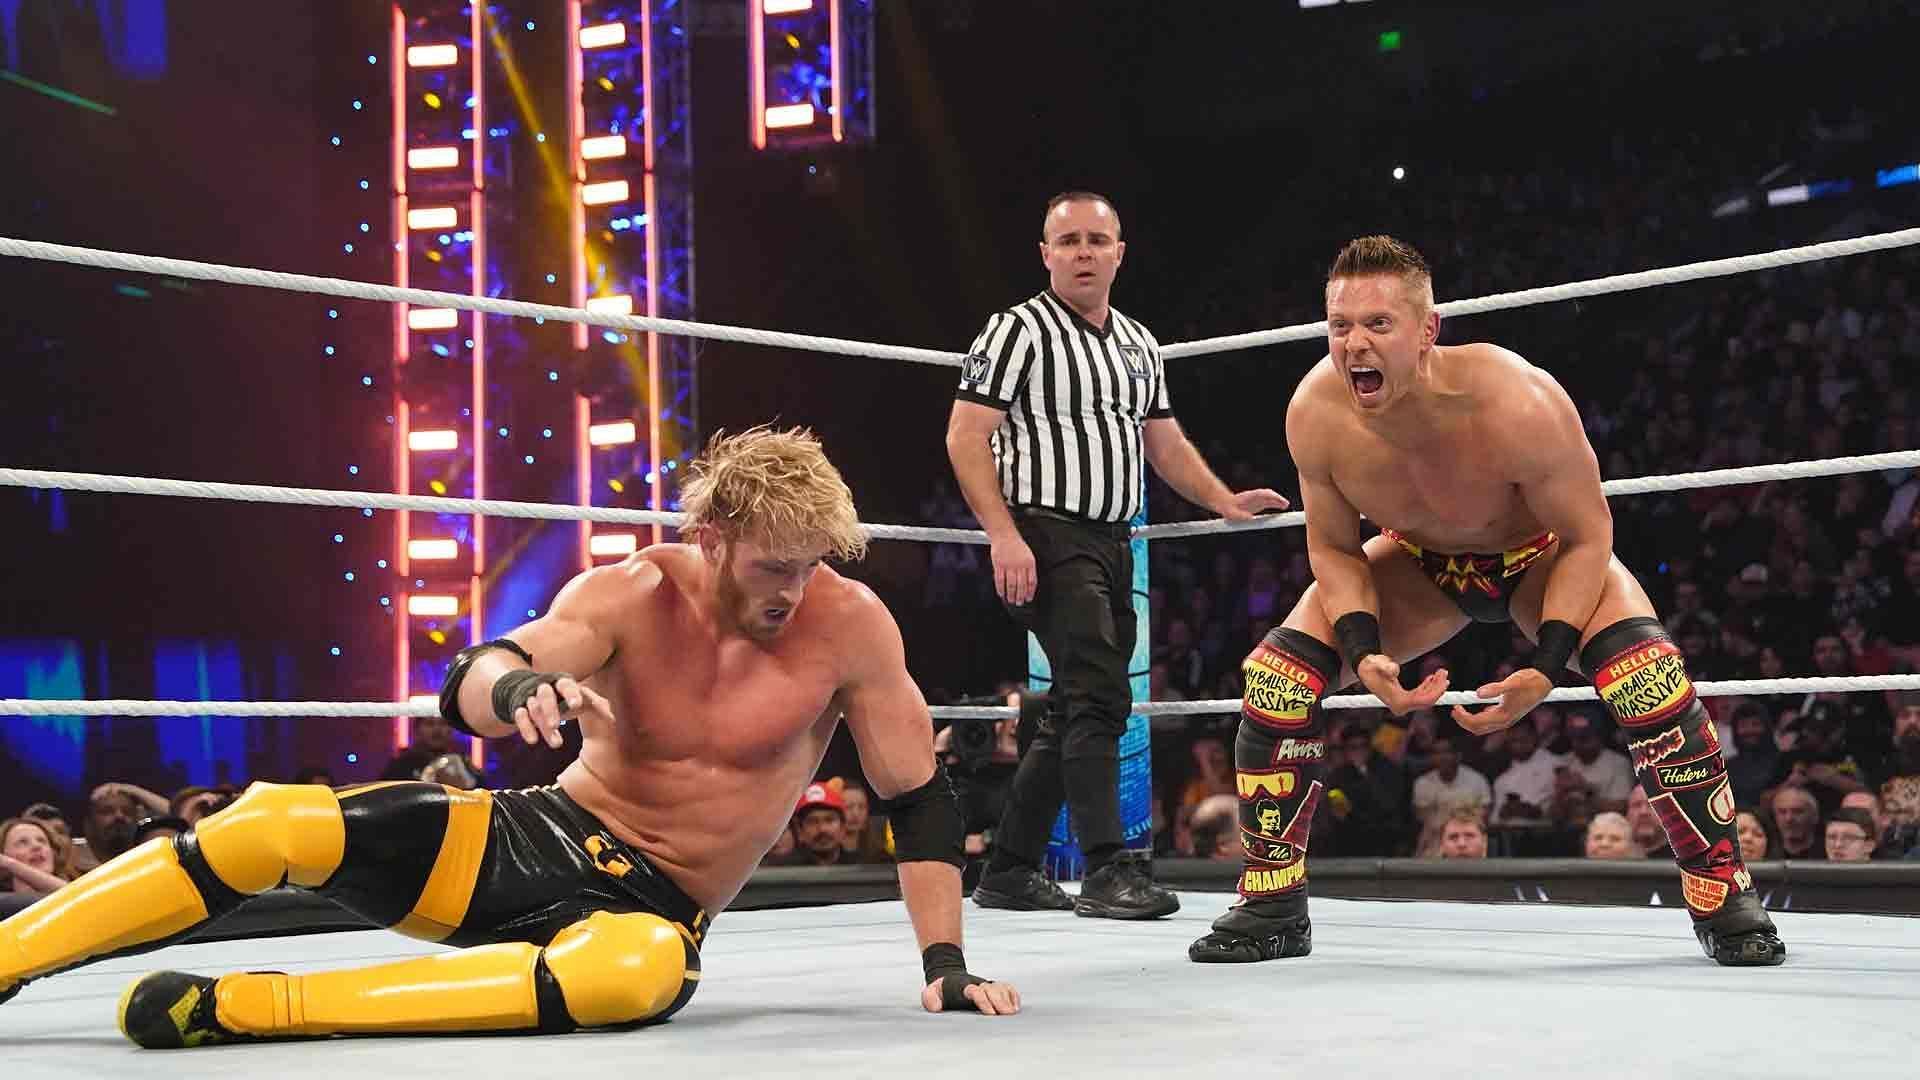 The Miz taunts Logan Paul in the ring on WWE SmackDown